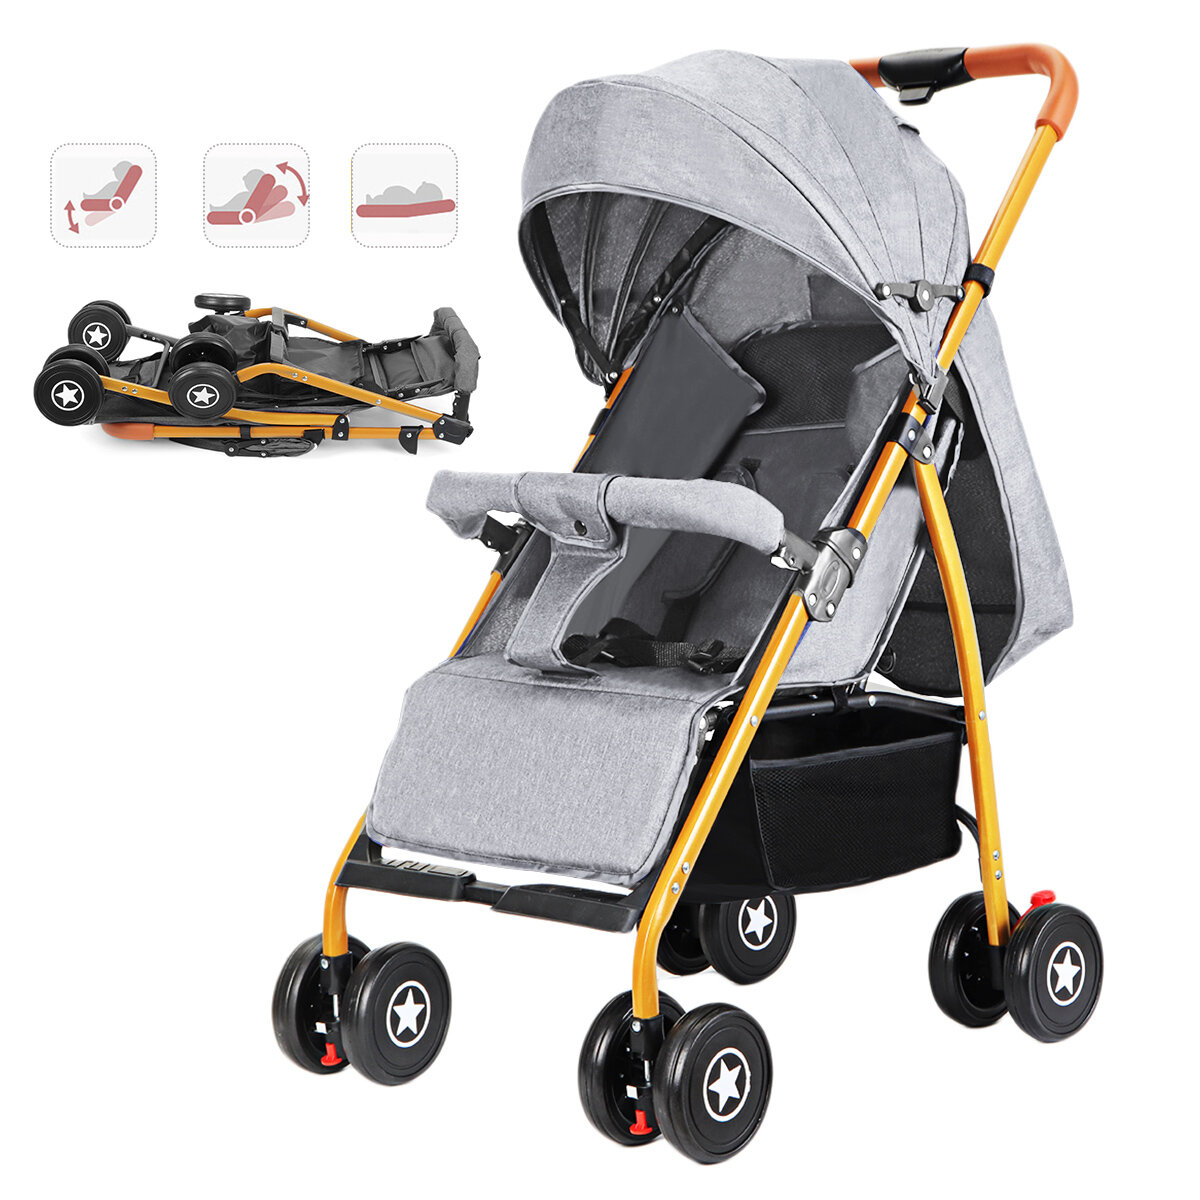 Foldable Baby Stroller Waterproof Three Angle Adjustment Baby Cart High-view Reclining Stroller Ligh